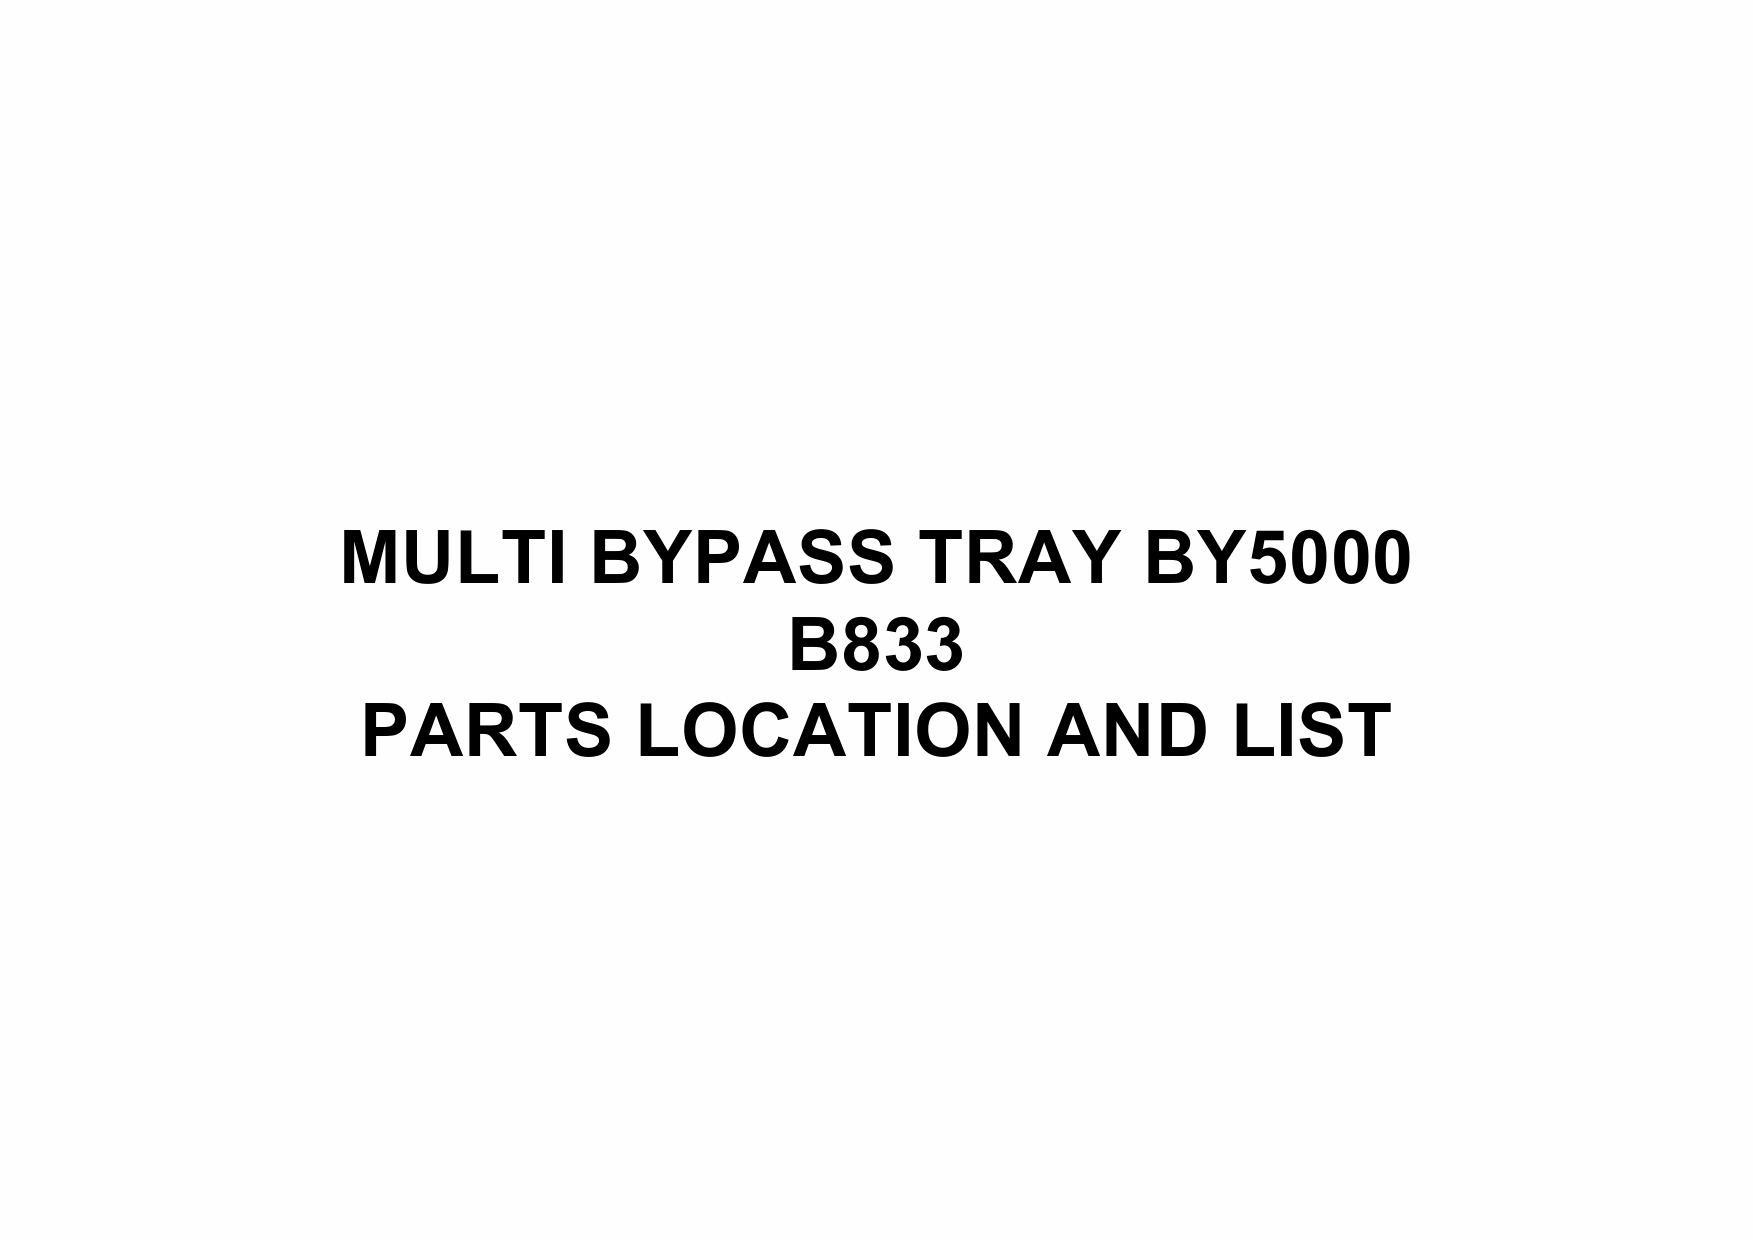 RICOH Options B833 MULTI-BYPASS-TRAY-BY5000 Parts Catalog PDF download-1